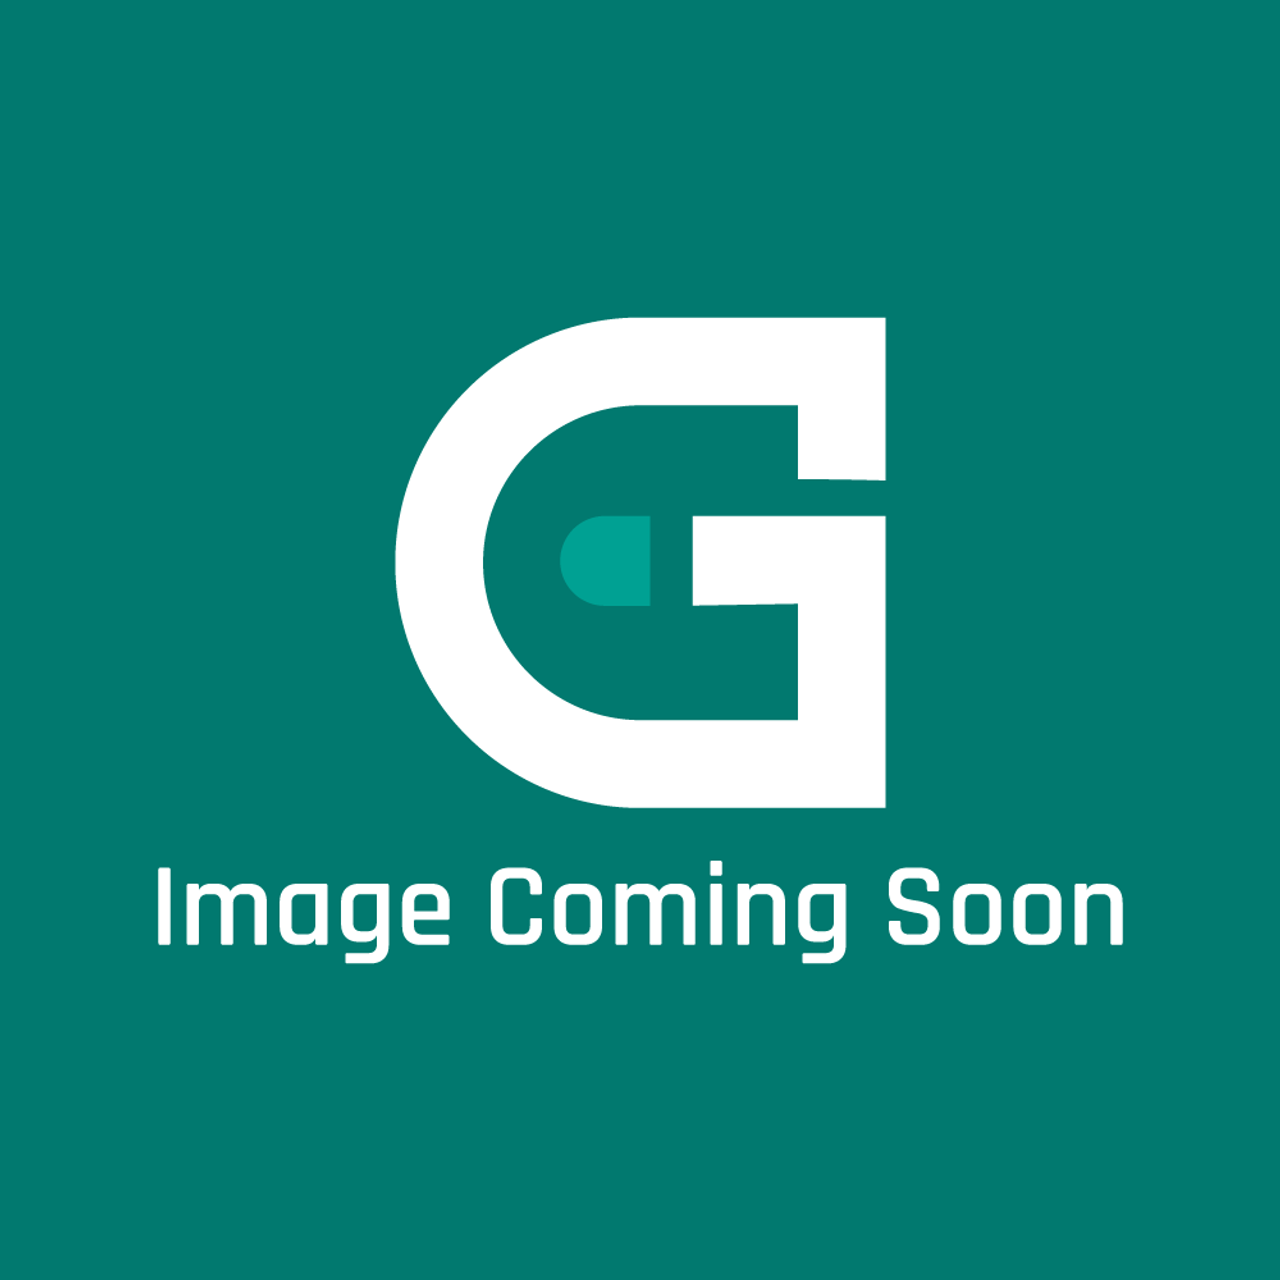 AGA Marvel F3028 - Injector Cat 92/340 (Klg304) - Image Coming Soon!